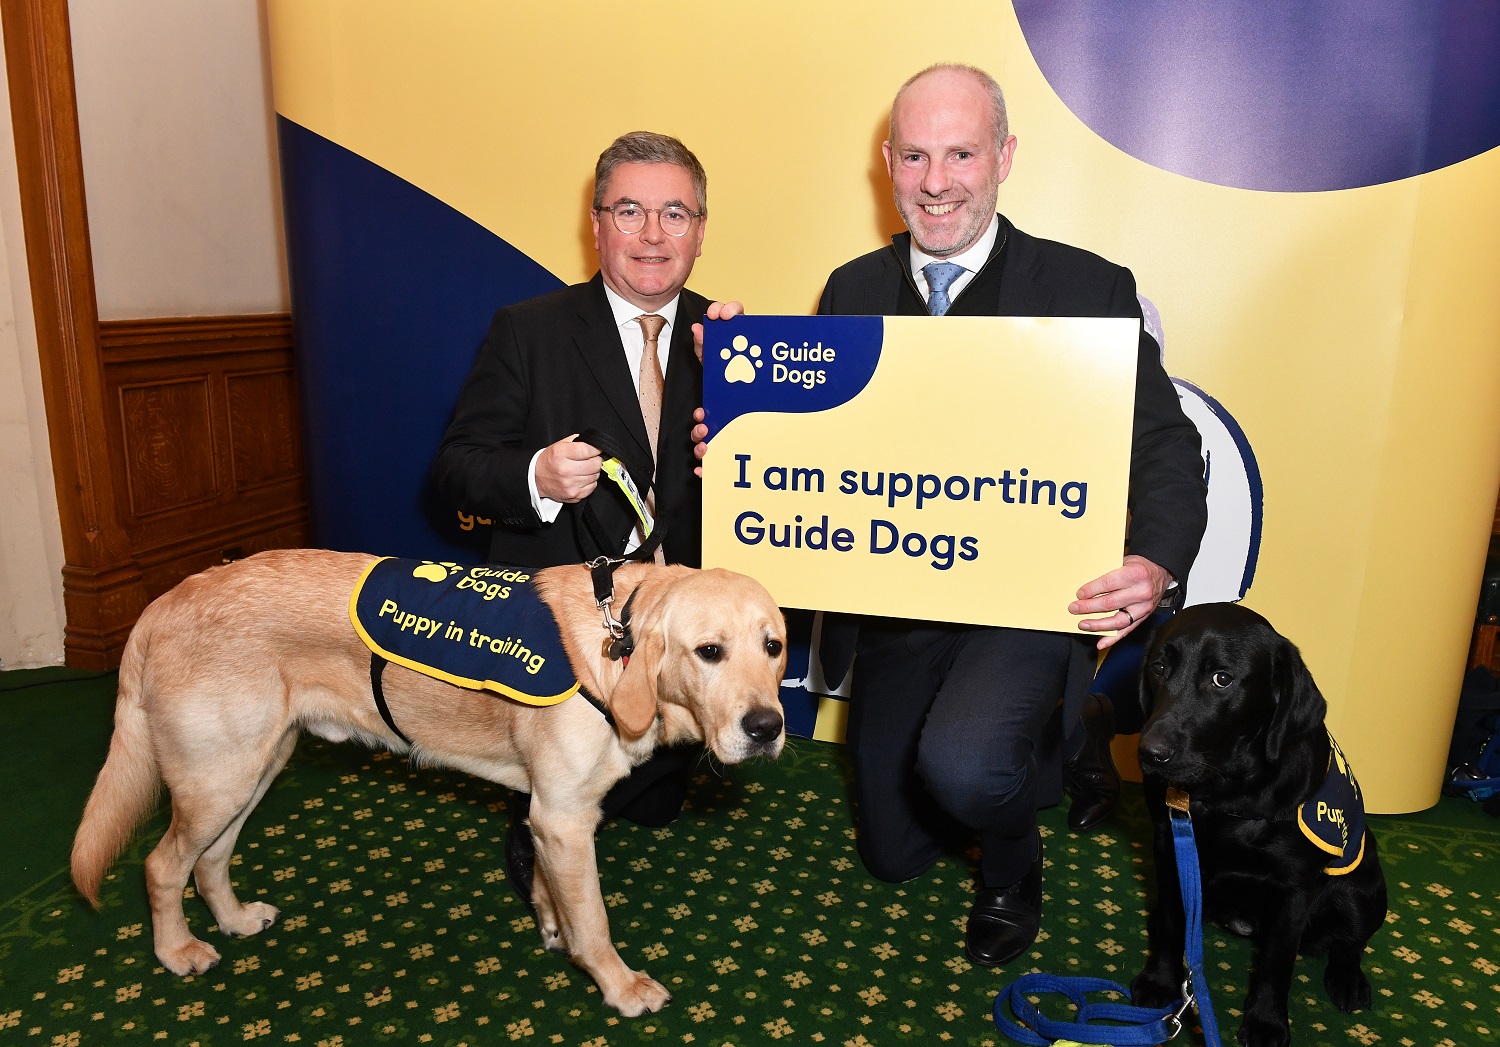 Justin Meets Guide Dog Users In Parliament